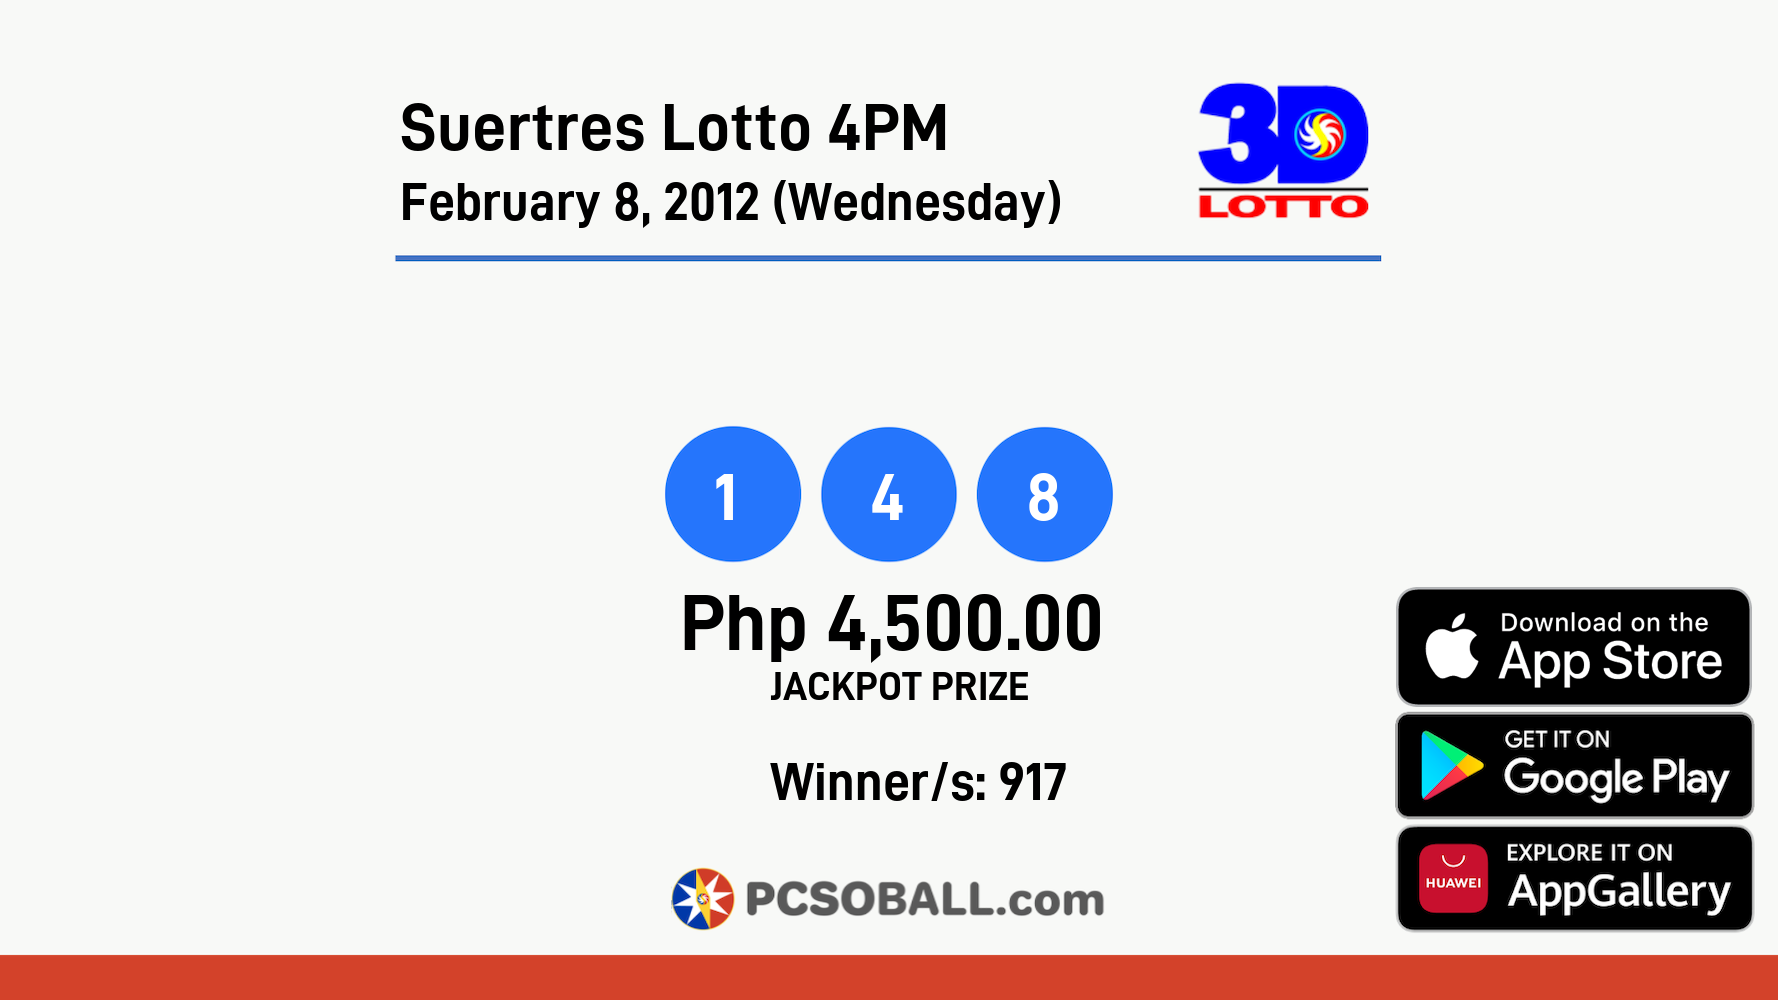 Suertres Lotto 4PM February 8, 2012 (Wednesday) Result